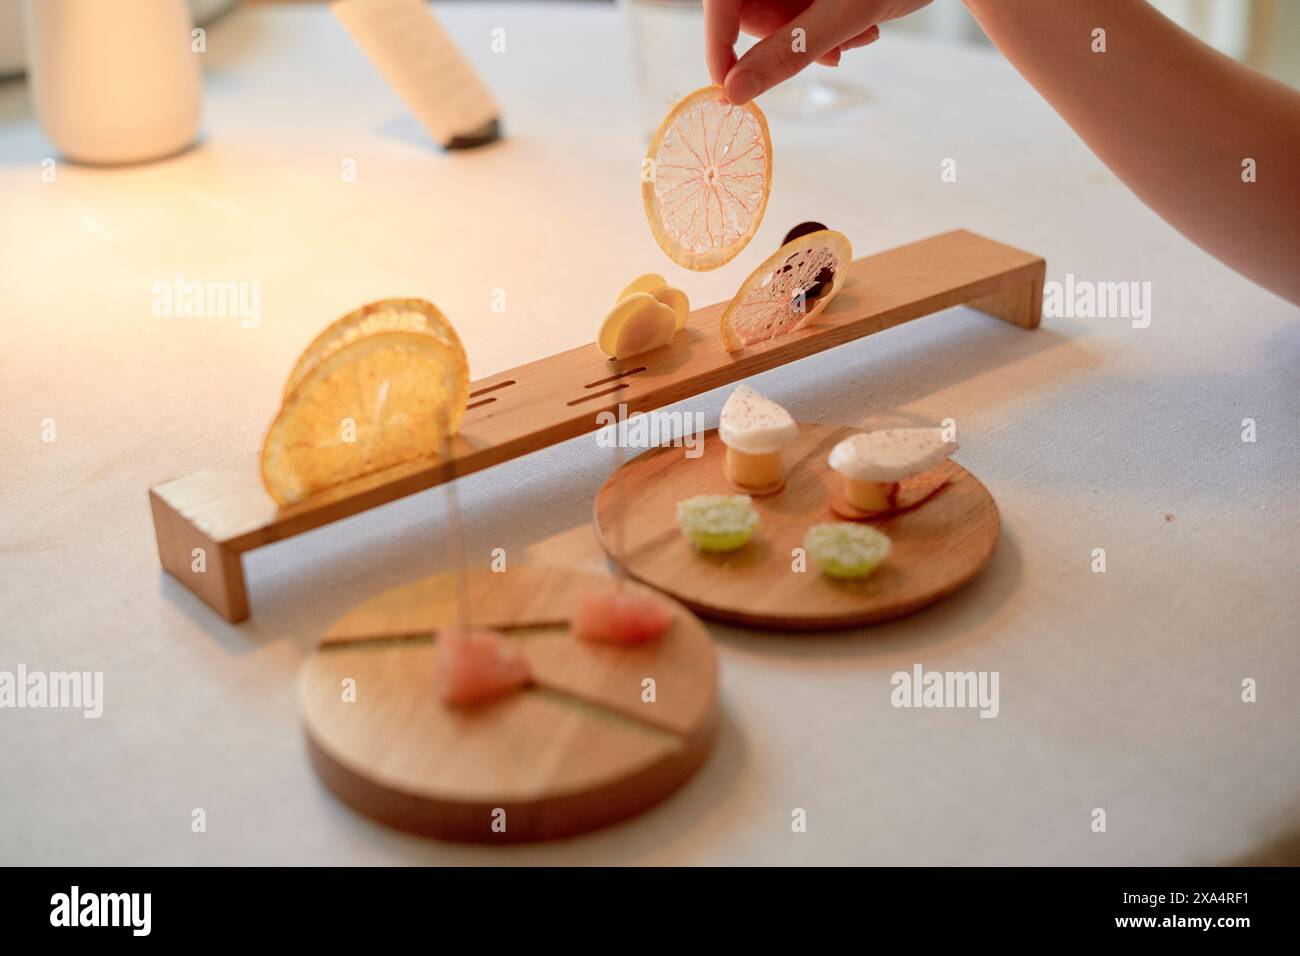 A hand arranging delicate gourmet bites on a wooden serving platter with precision. Stock Photo